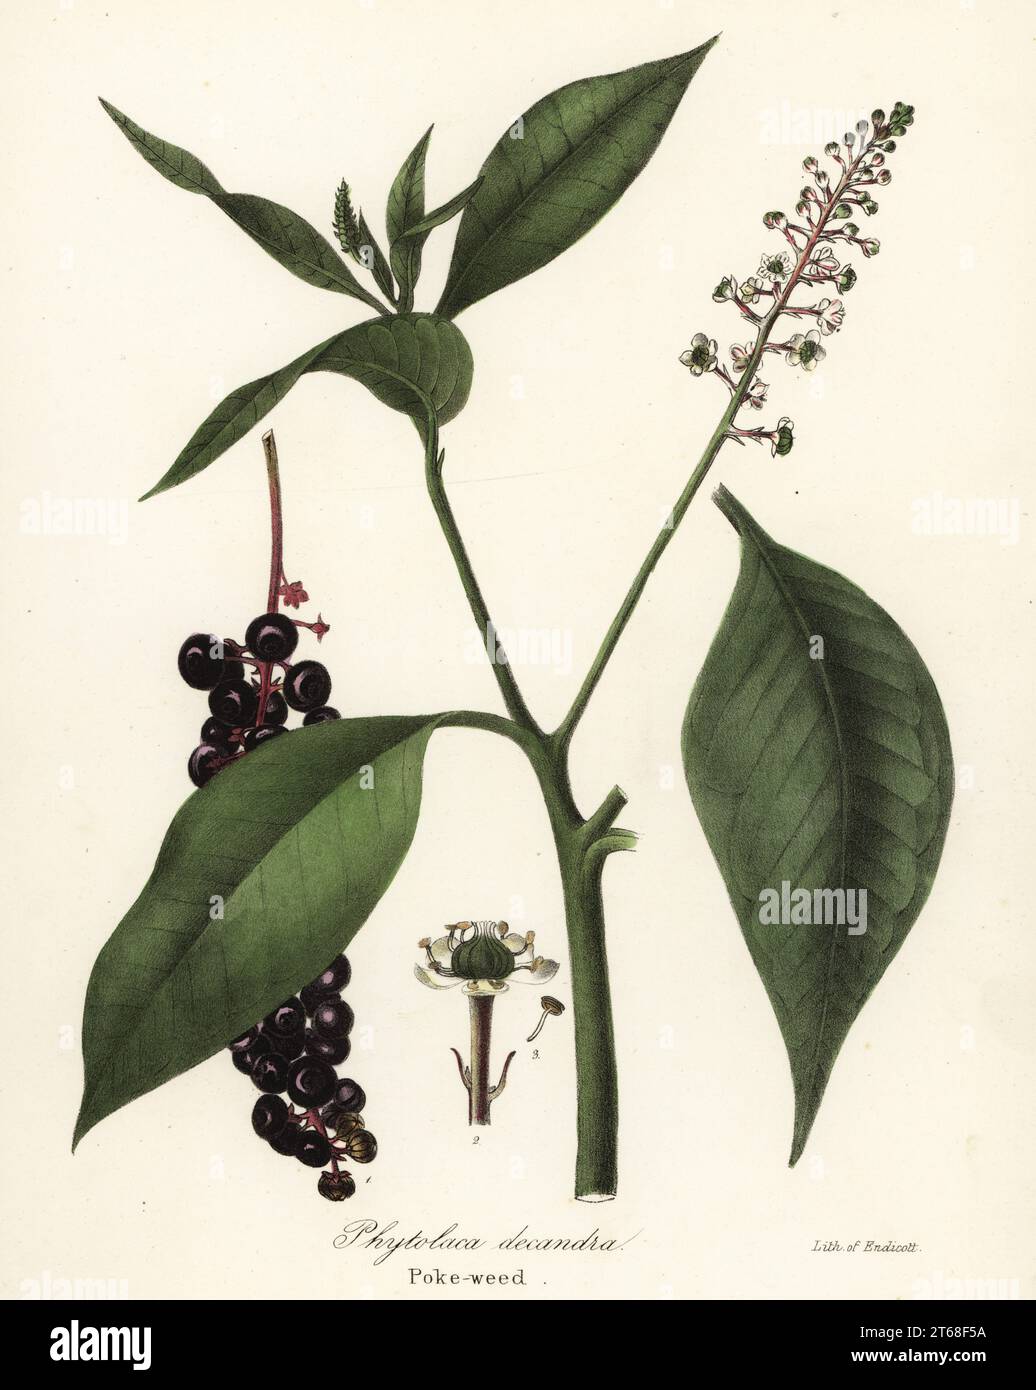 Pokeweed, Phytolacca americana (Phytolaca decandra). Handcoloured lithograph by Endicott after a botanical illustration from John Torreys A Flora of the State of New York, Carroll and Cook, Albany, 1843. The plates drawn by John Torrey, Agnes Mitchell, Elizabeth Paoley and Swinton. John Torrey was an American botanist, chemist and physician 1796-1873. Stock Photo